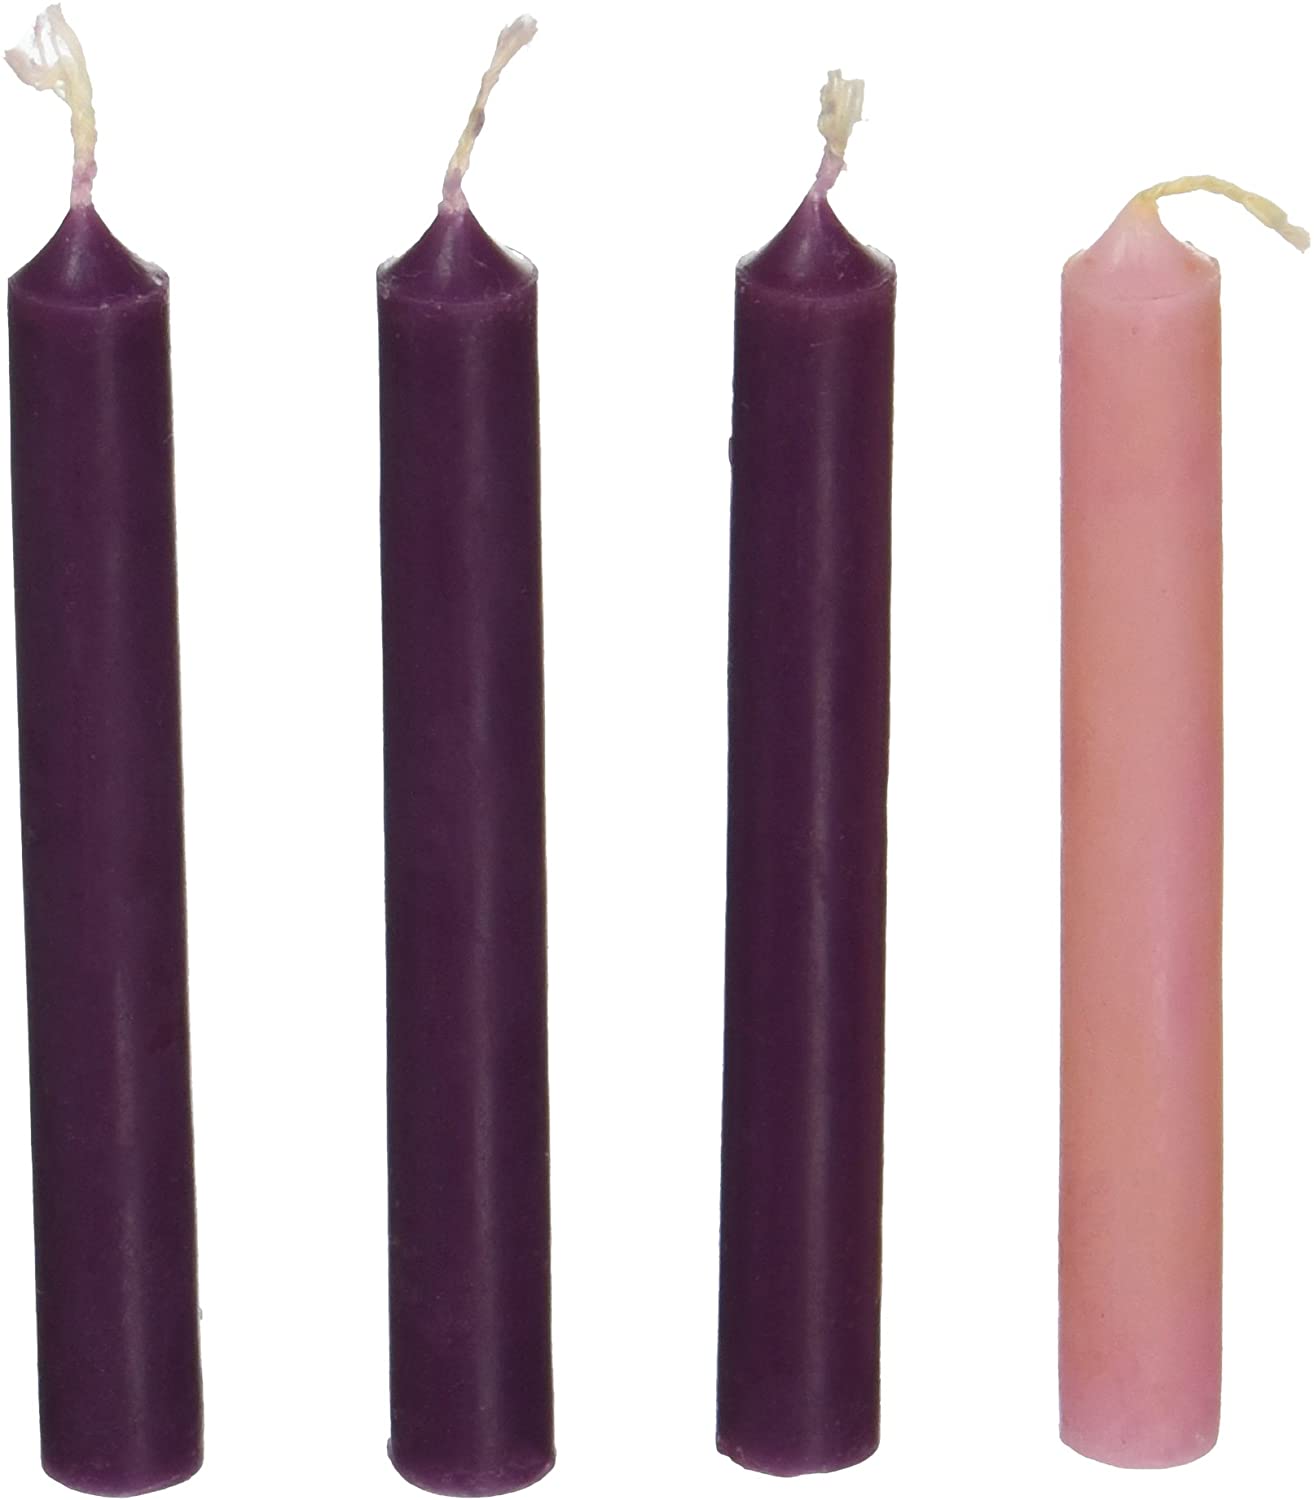 4Pc Mini Advent Candle Set 3 Purple & 1 Pink 4" Refill [candles only, wreath not included]